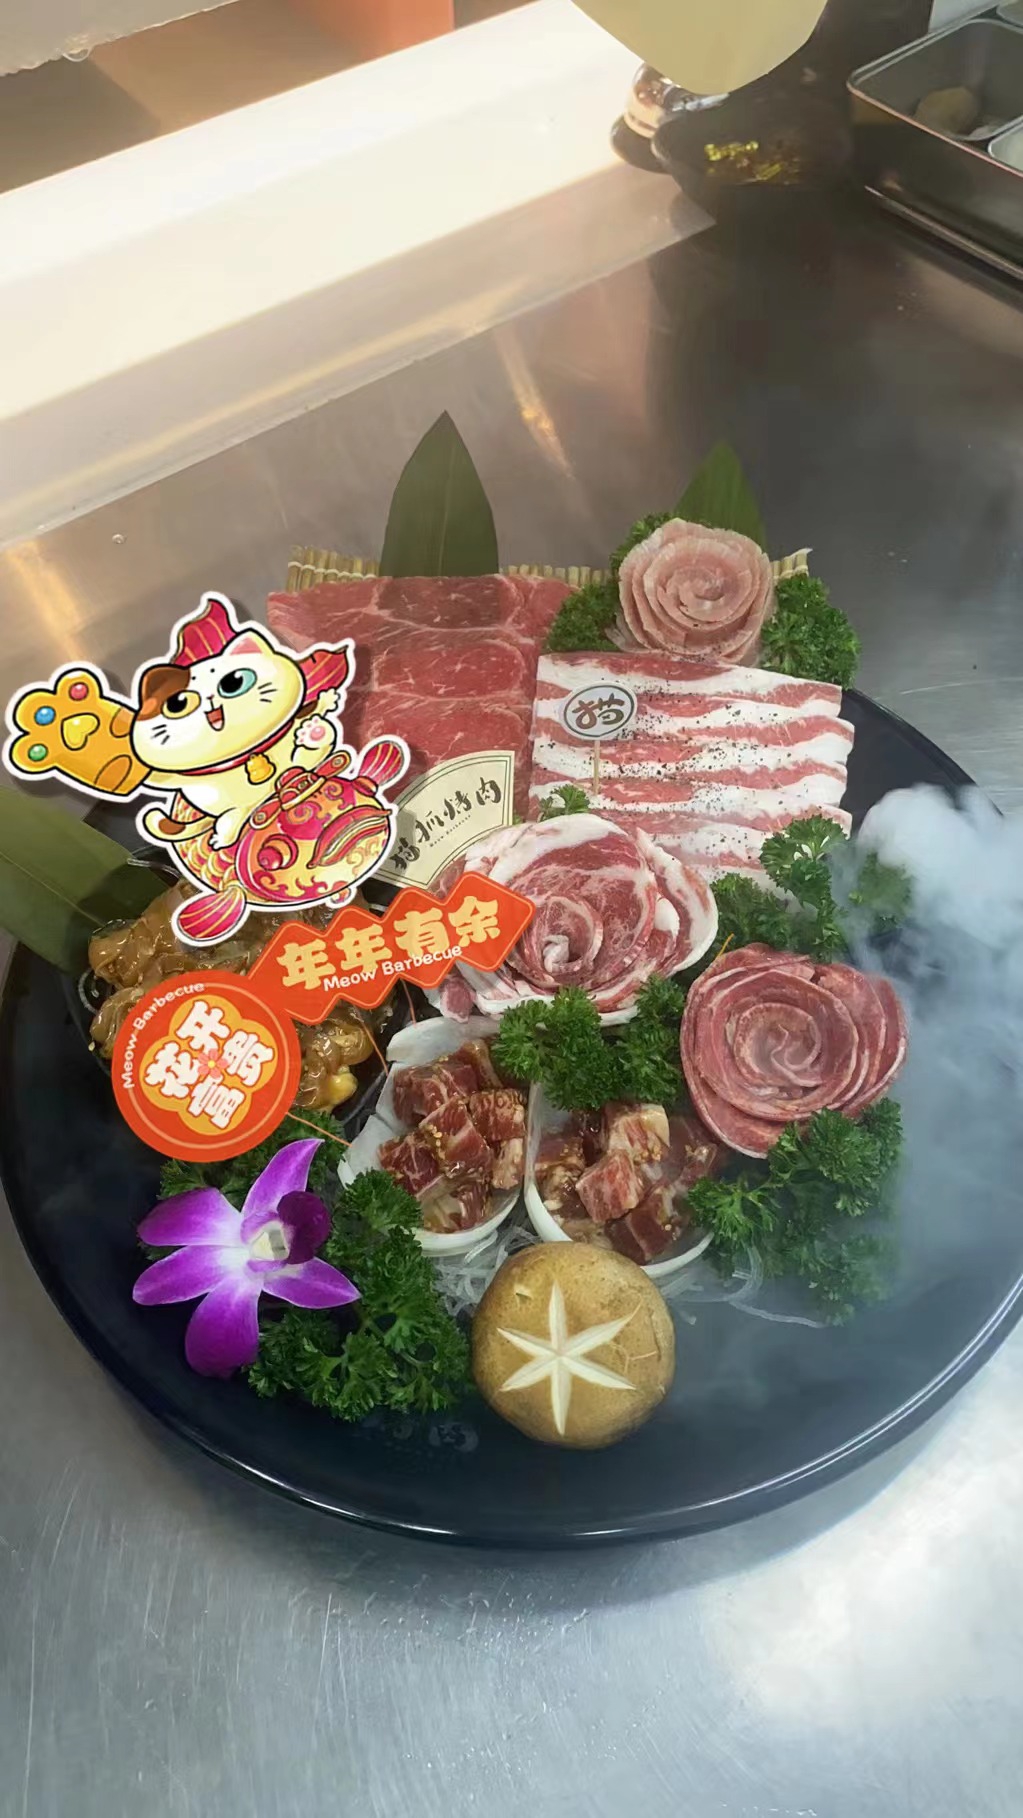 Lobang: MORE THAN 50 CNY 2023 F&B Deals - Your one stop guide to Yusheng, Pen Cai, Set Menus and more this Lunar New Year! - 115